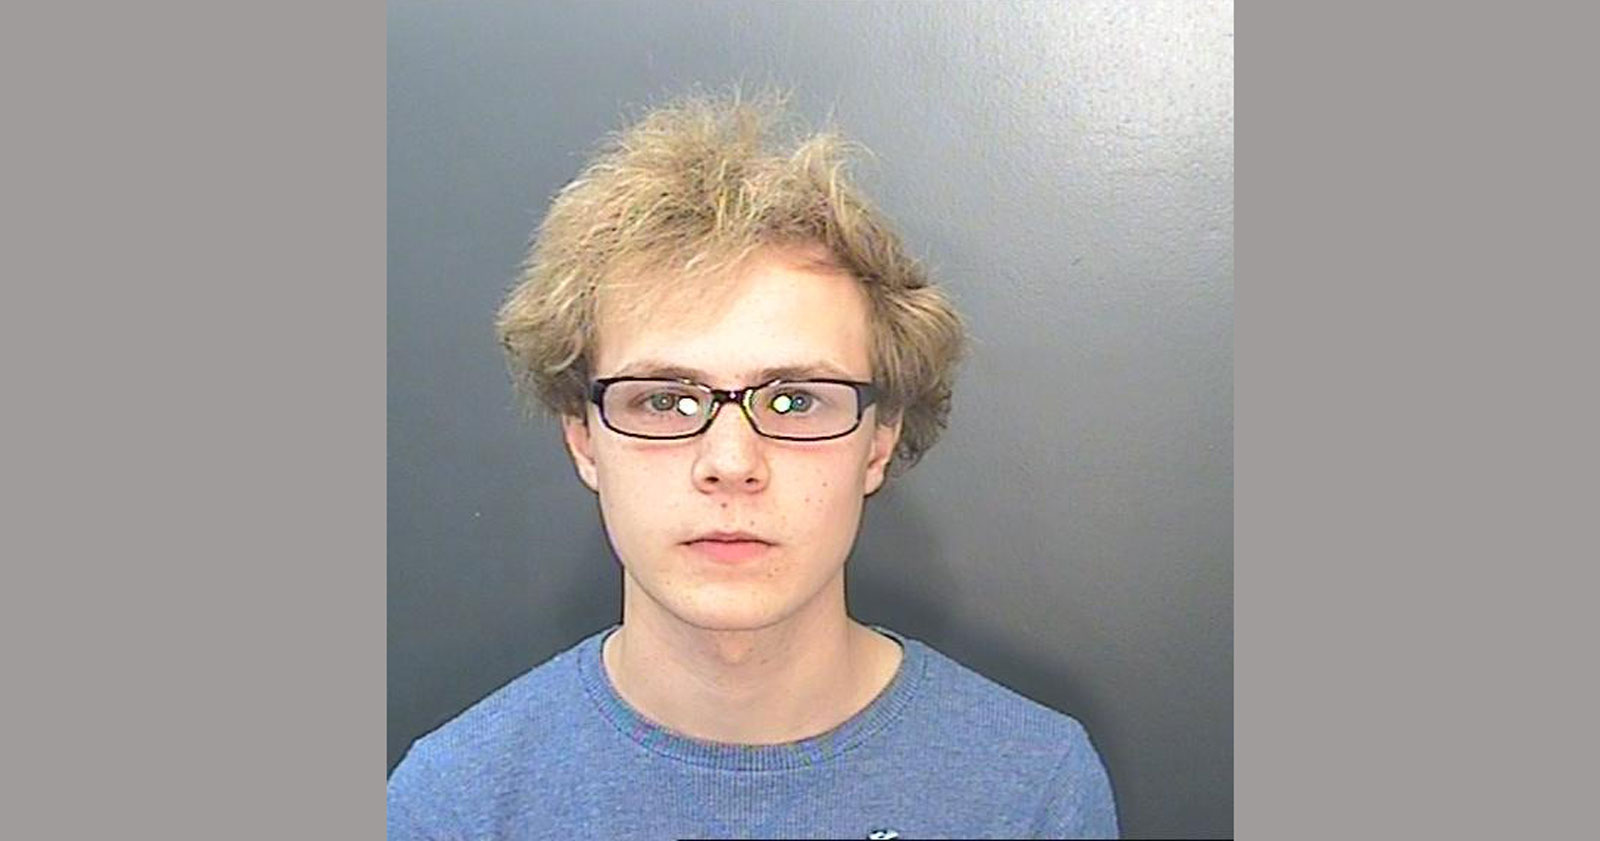 Jamie Lock, 21, was jailed for a total of 18 months following a trial at York Crown Court